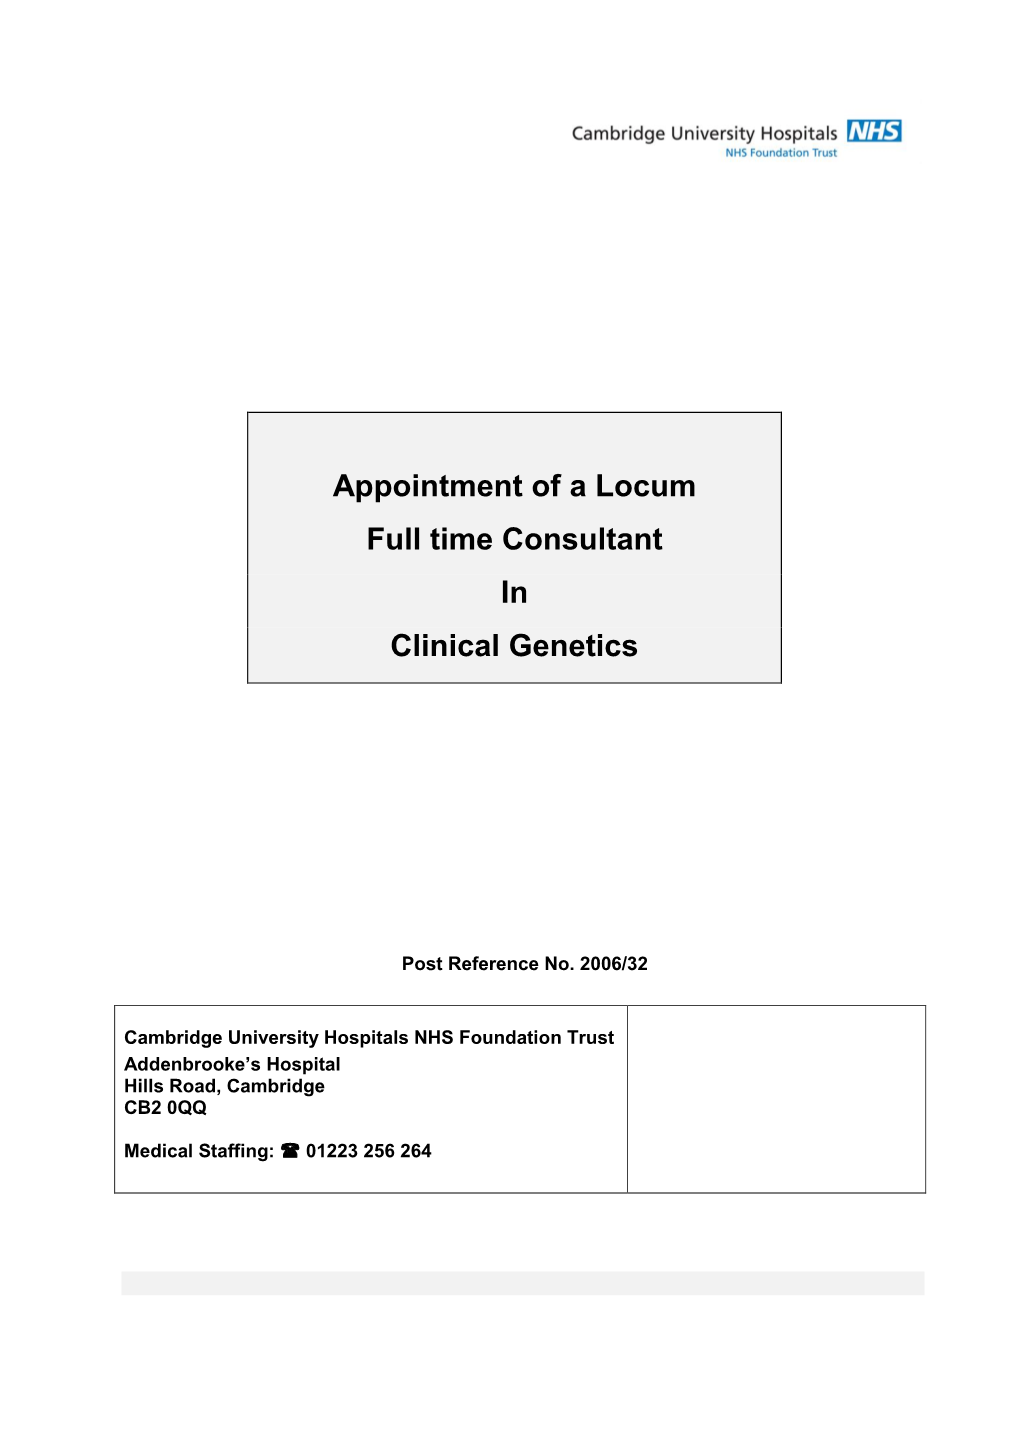 Appointment of a Locum Full Time Consultant in Clinical Genetics